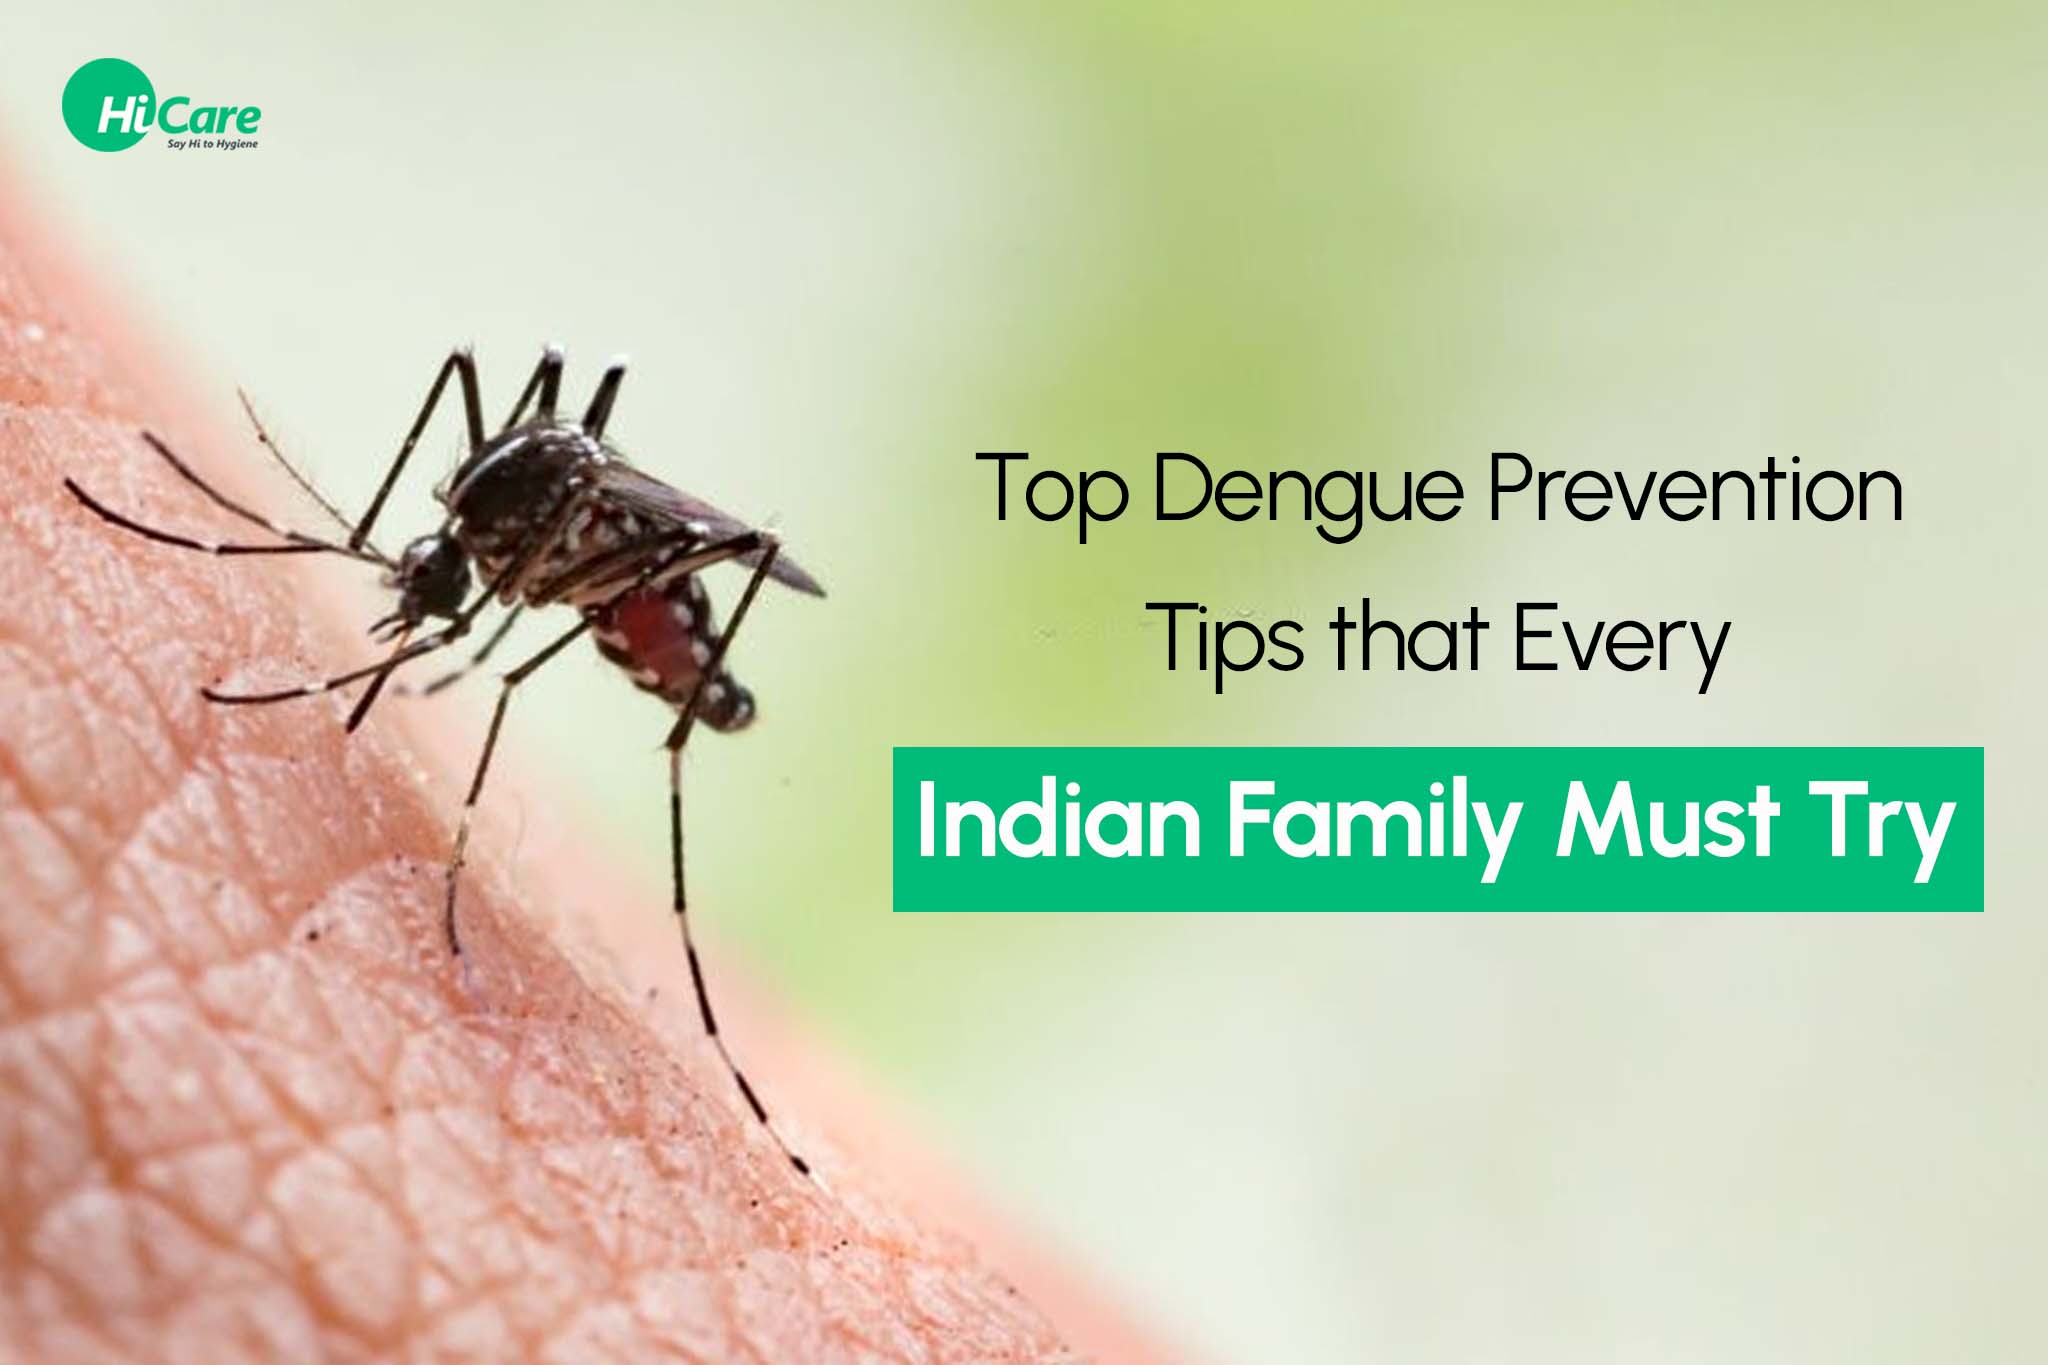 Top Dengue Prevention Tips that Every Indian Family Must Try